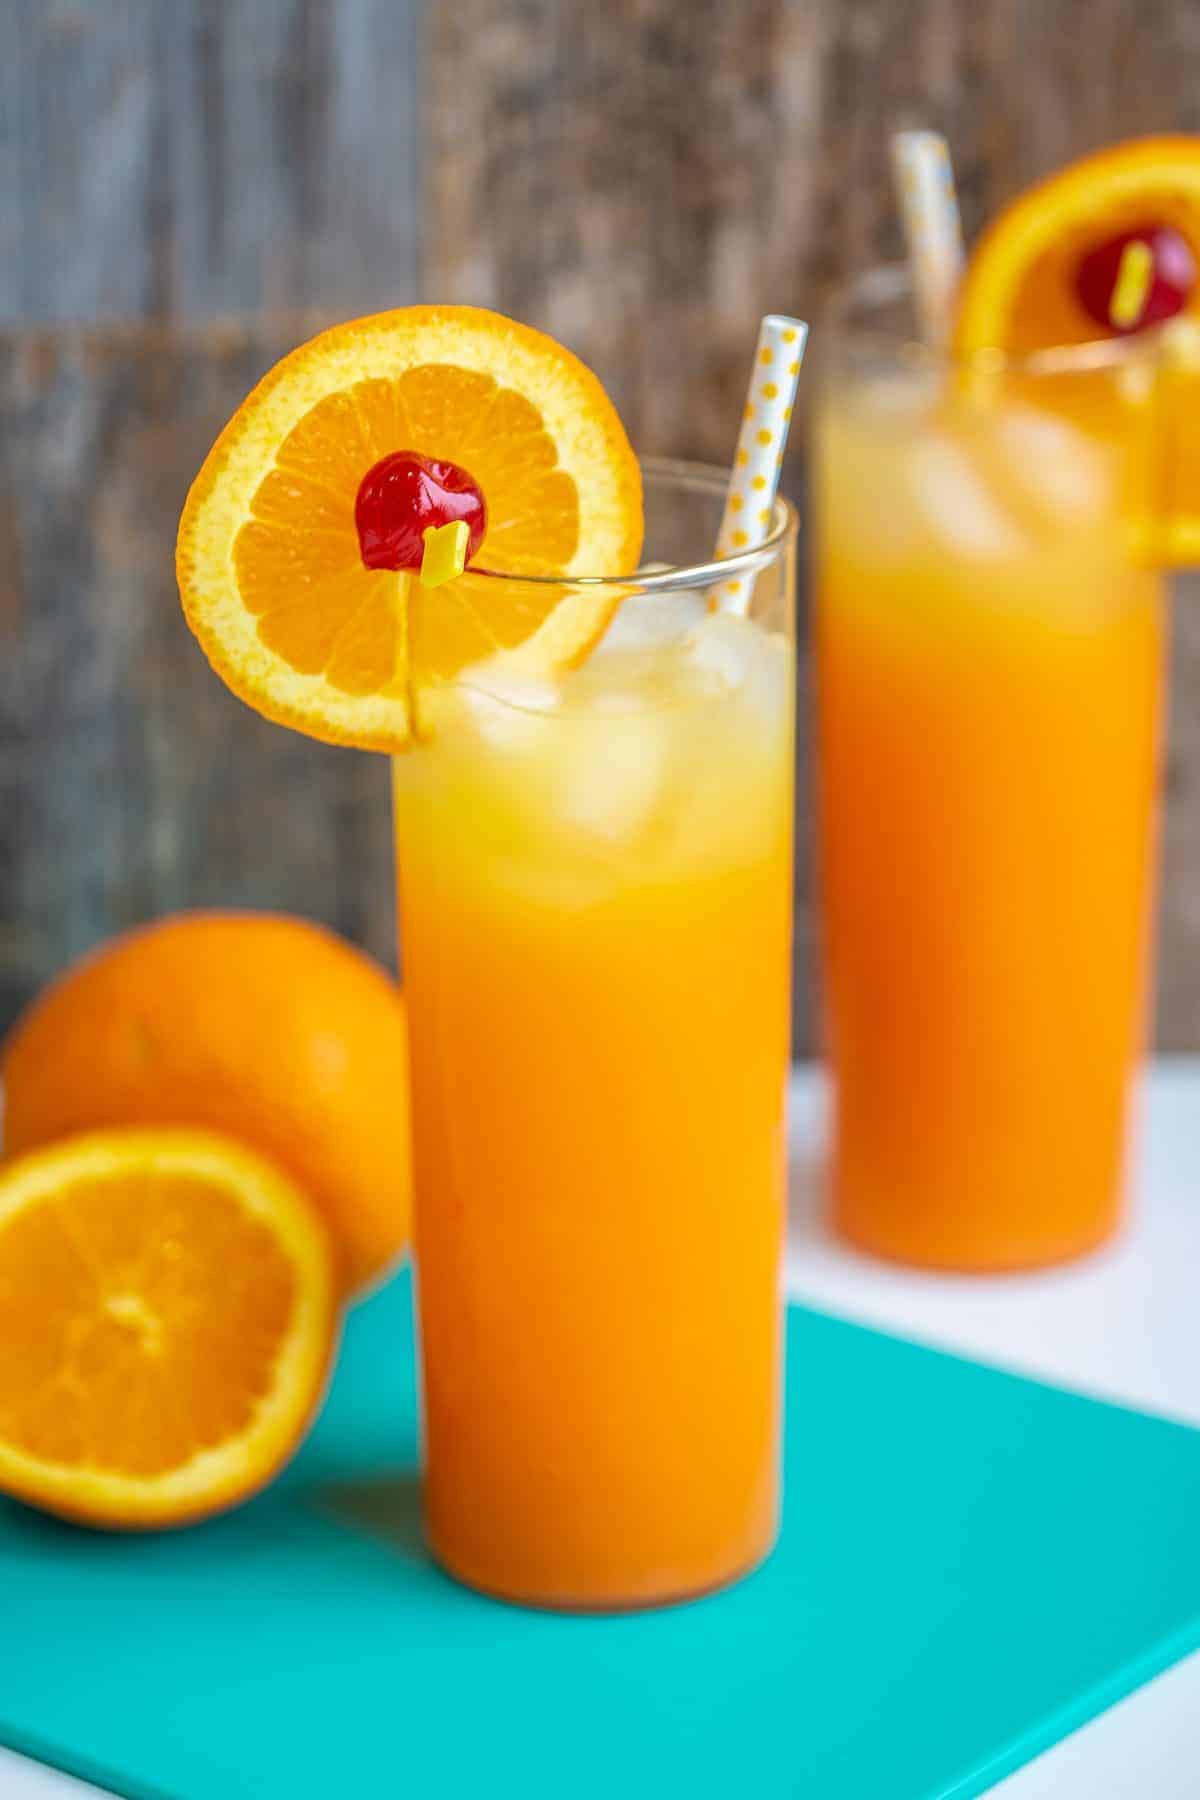 The Screwdriver Cocktail | The Kitchen Magpie